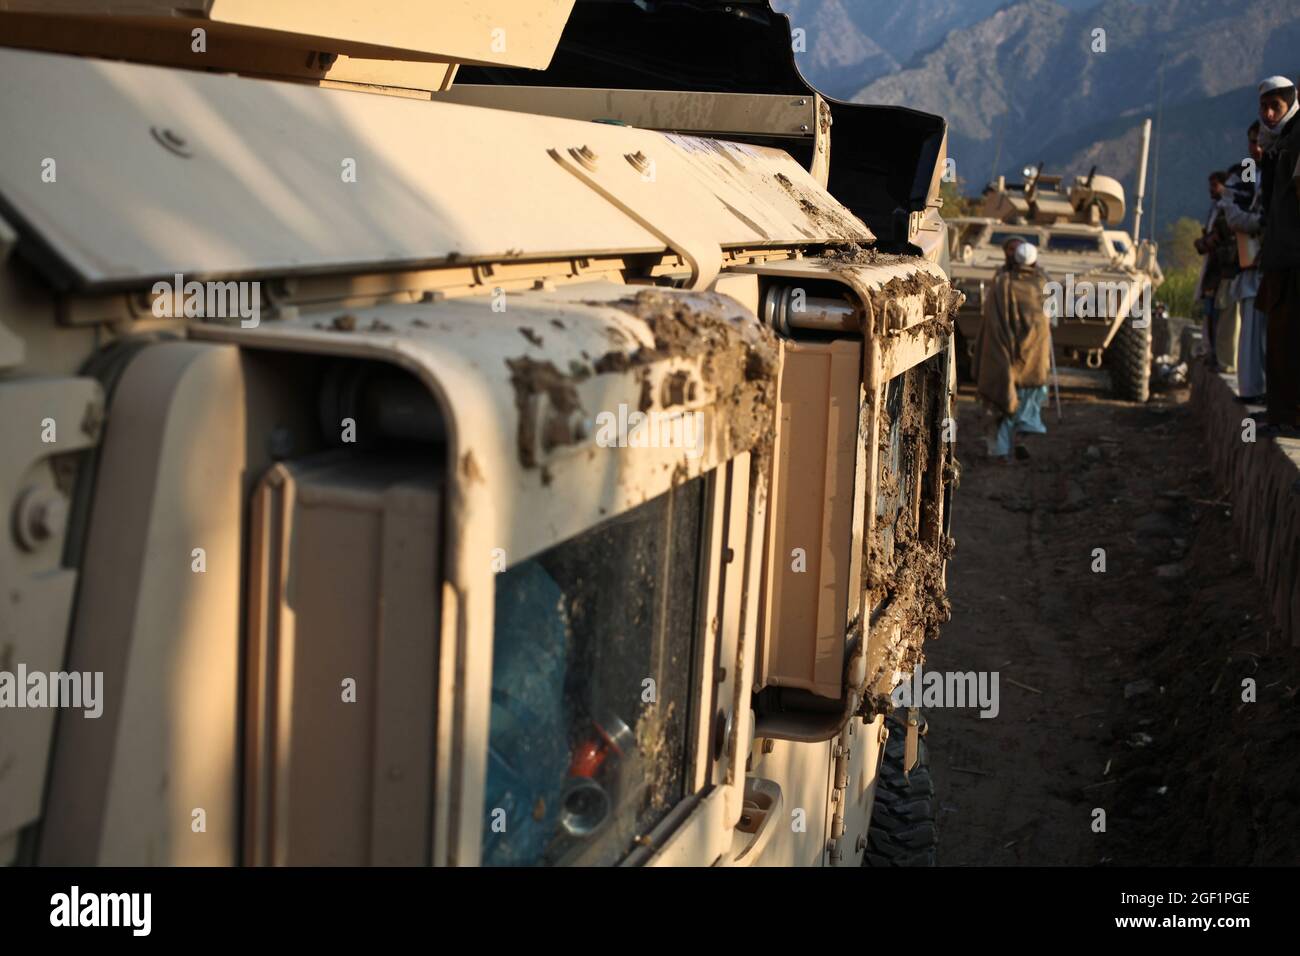 Mud remains over the windows of a humvee that rolled over during a patrol across the Munay Village in the Shigal district of Kunar province, Afghanistan on Dec. 7.The vehicle, which belongs to Combat Company, 1st Battalion, 32nd Infantry Regiment, rolled over due to the bad condition of the road. Stock Photo